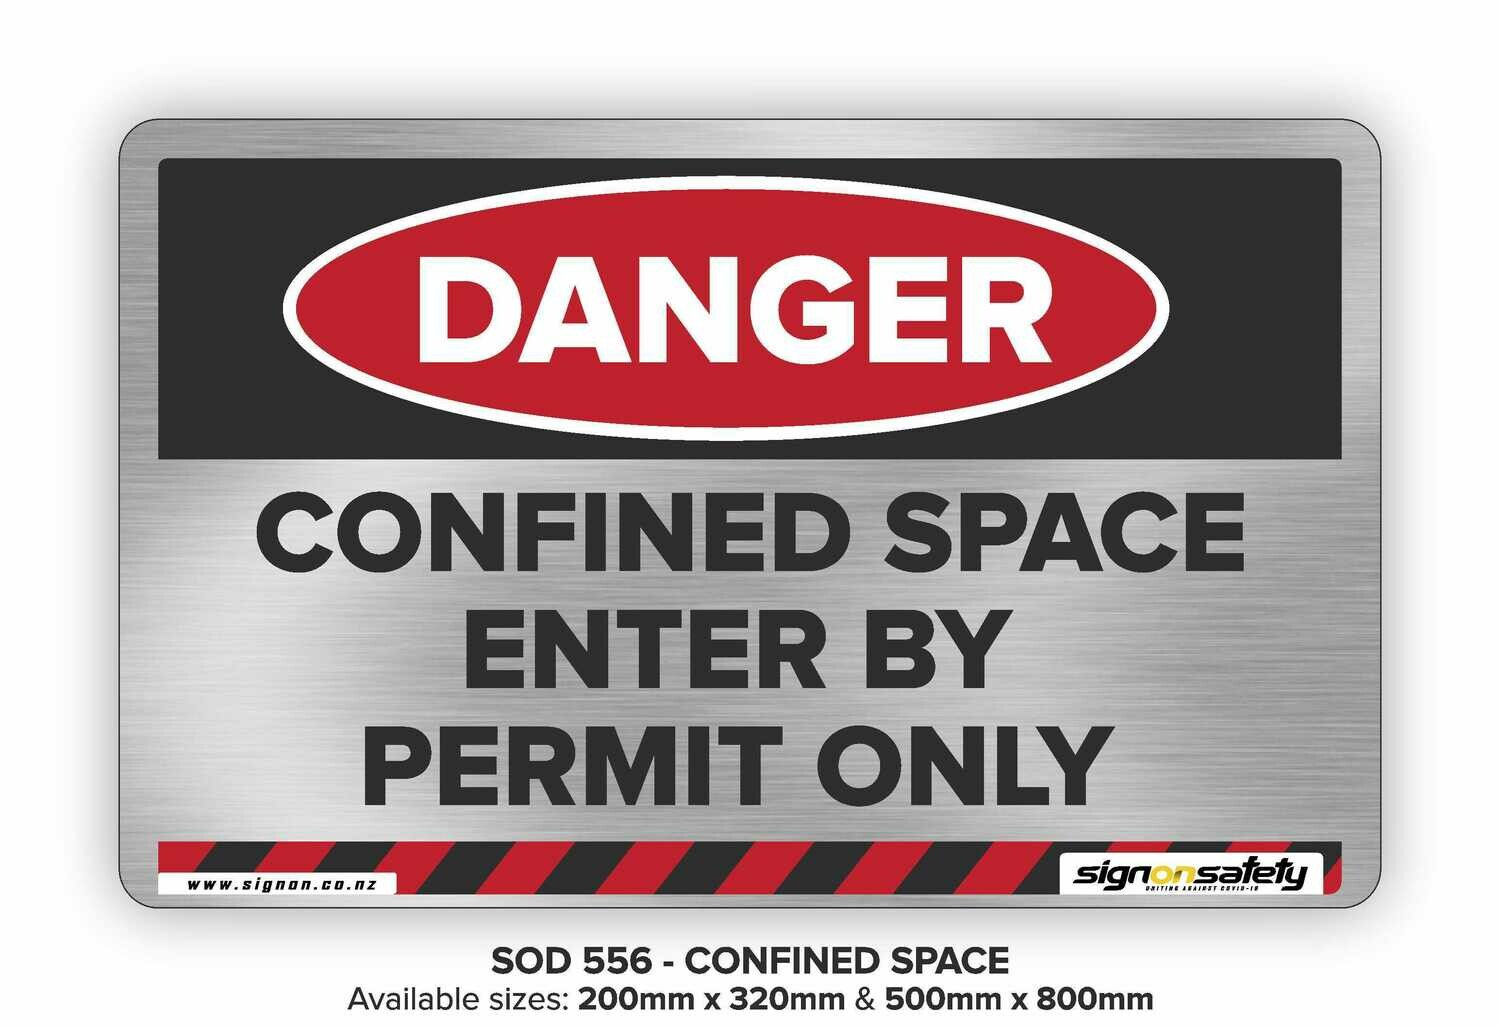 Danger - Confined Space Enter By Permit Only